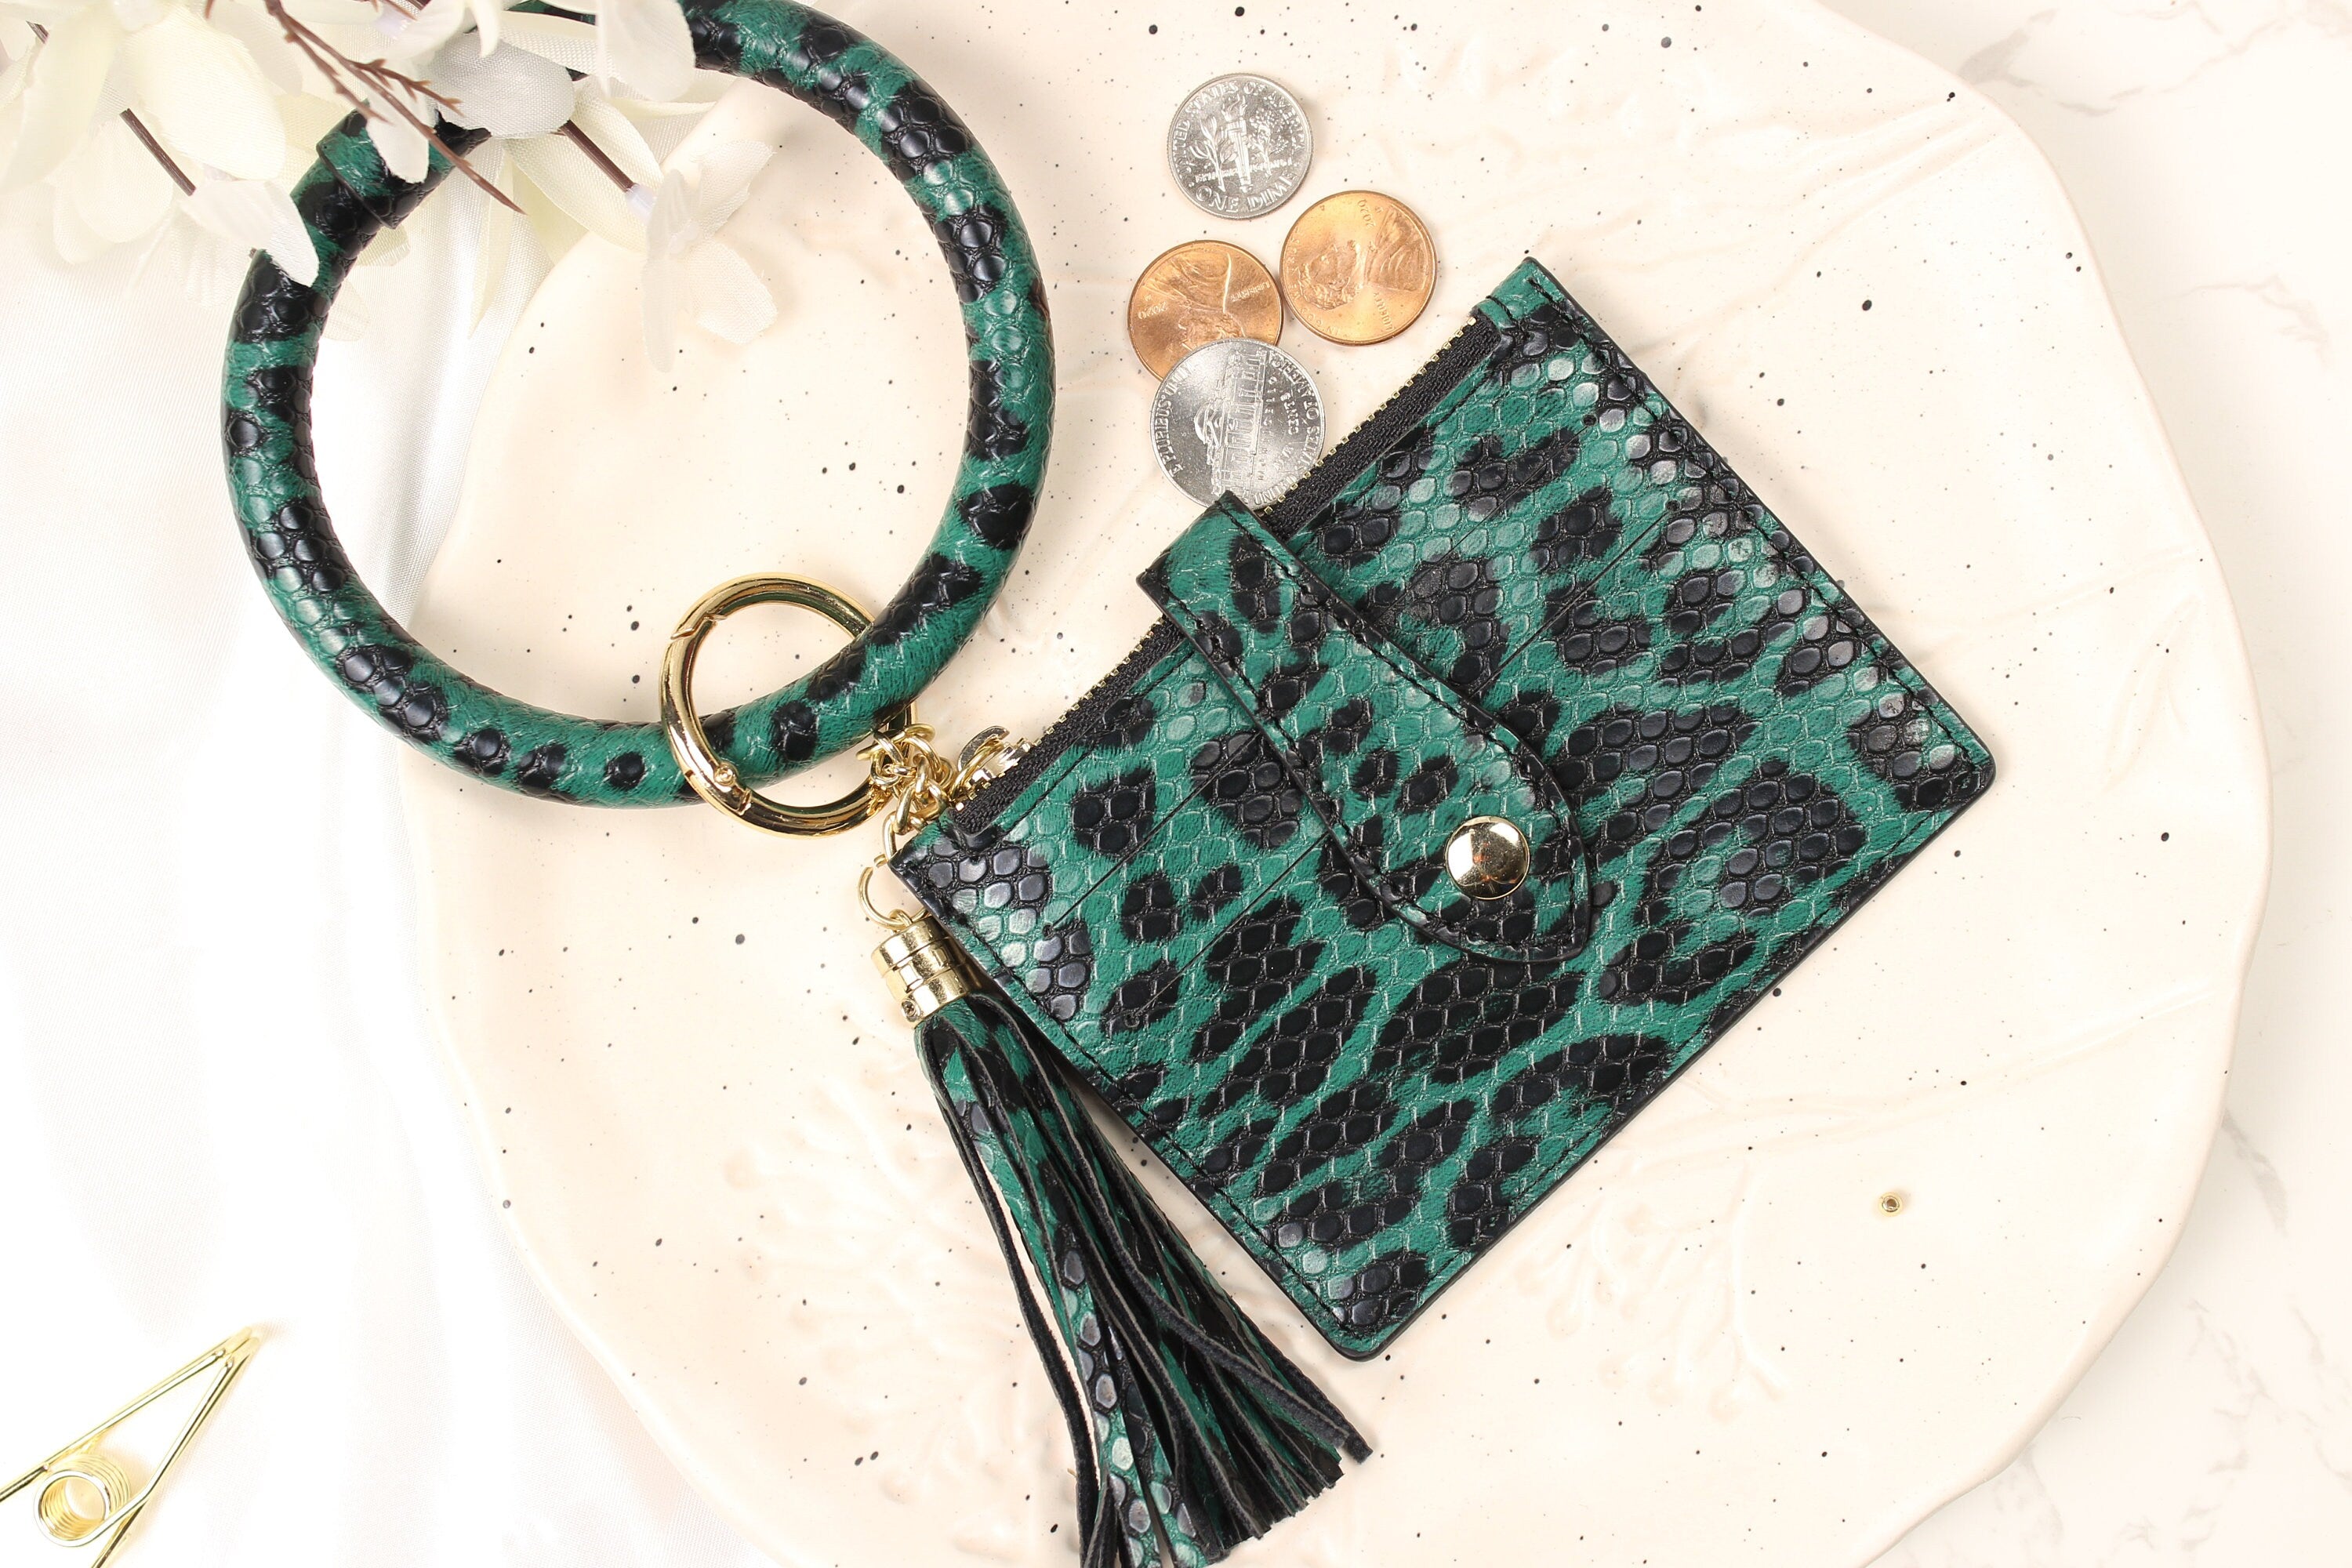 Leopard Leather Wallet Keychain, Card Holder Keychain, Zipper Pocket Wallet Bangle Keychain, Leopard Leather Wristlet Keyring and Coin Purse